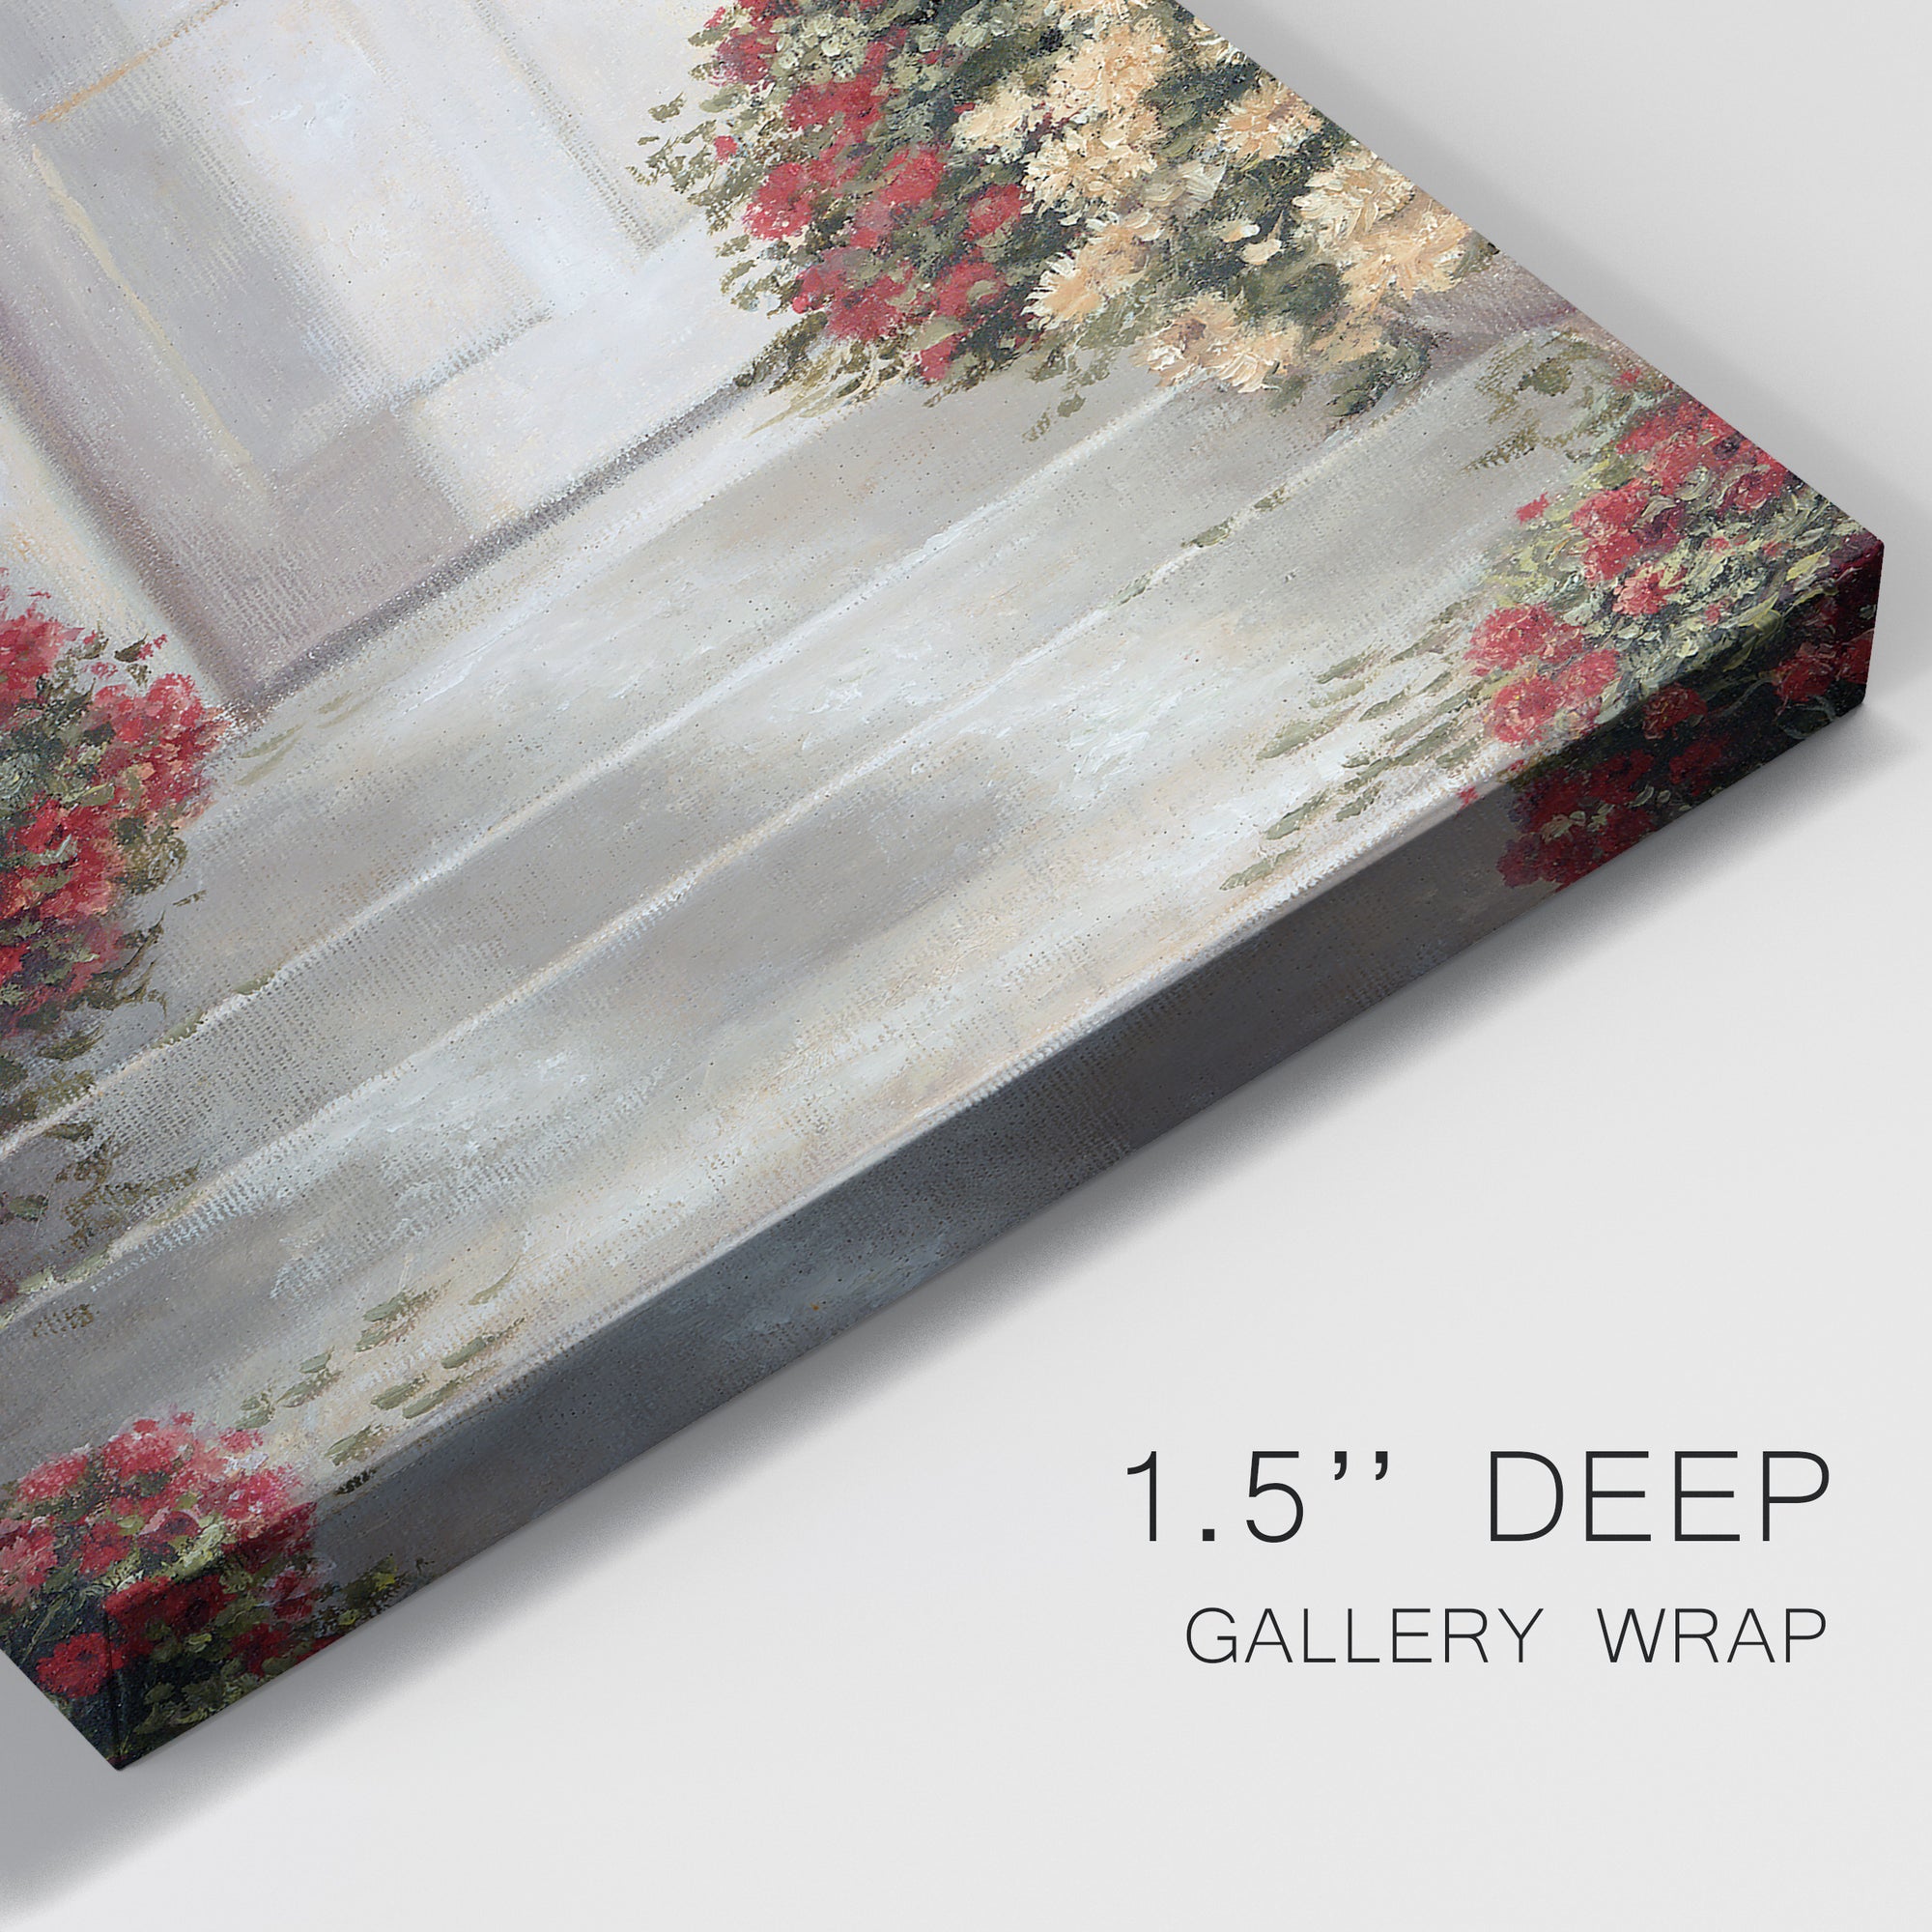 The Journal - Premium Gallery Wrapped Canvas - Ready to Hang